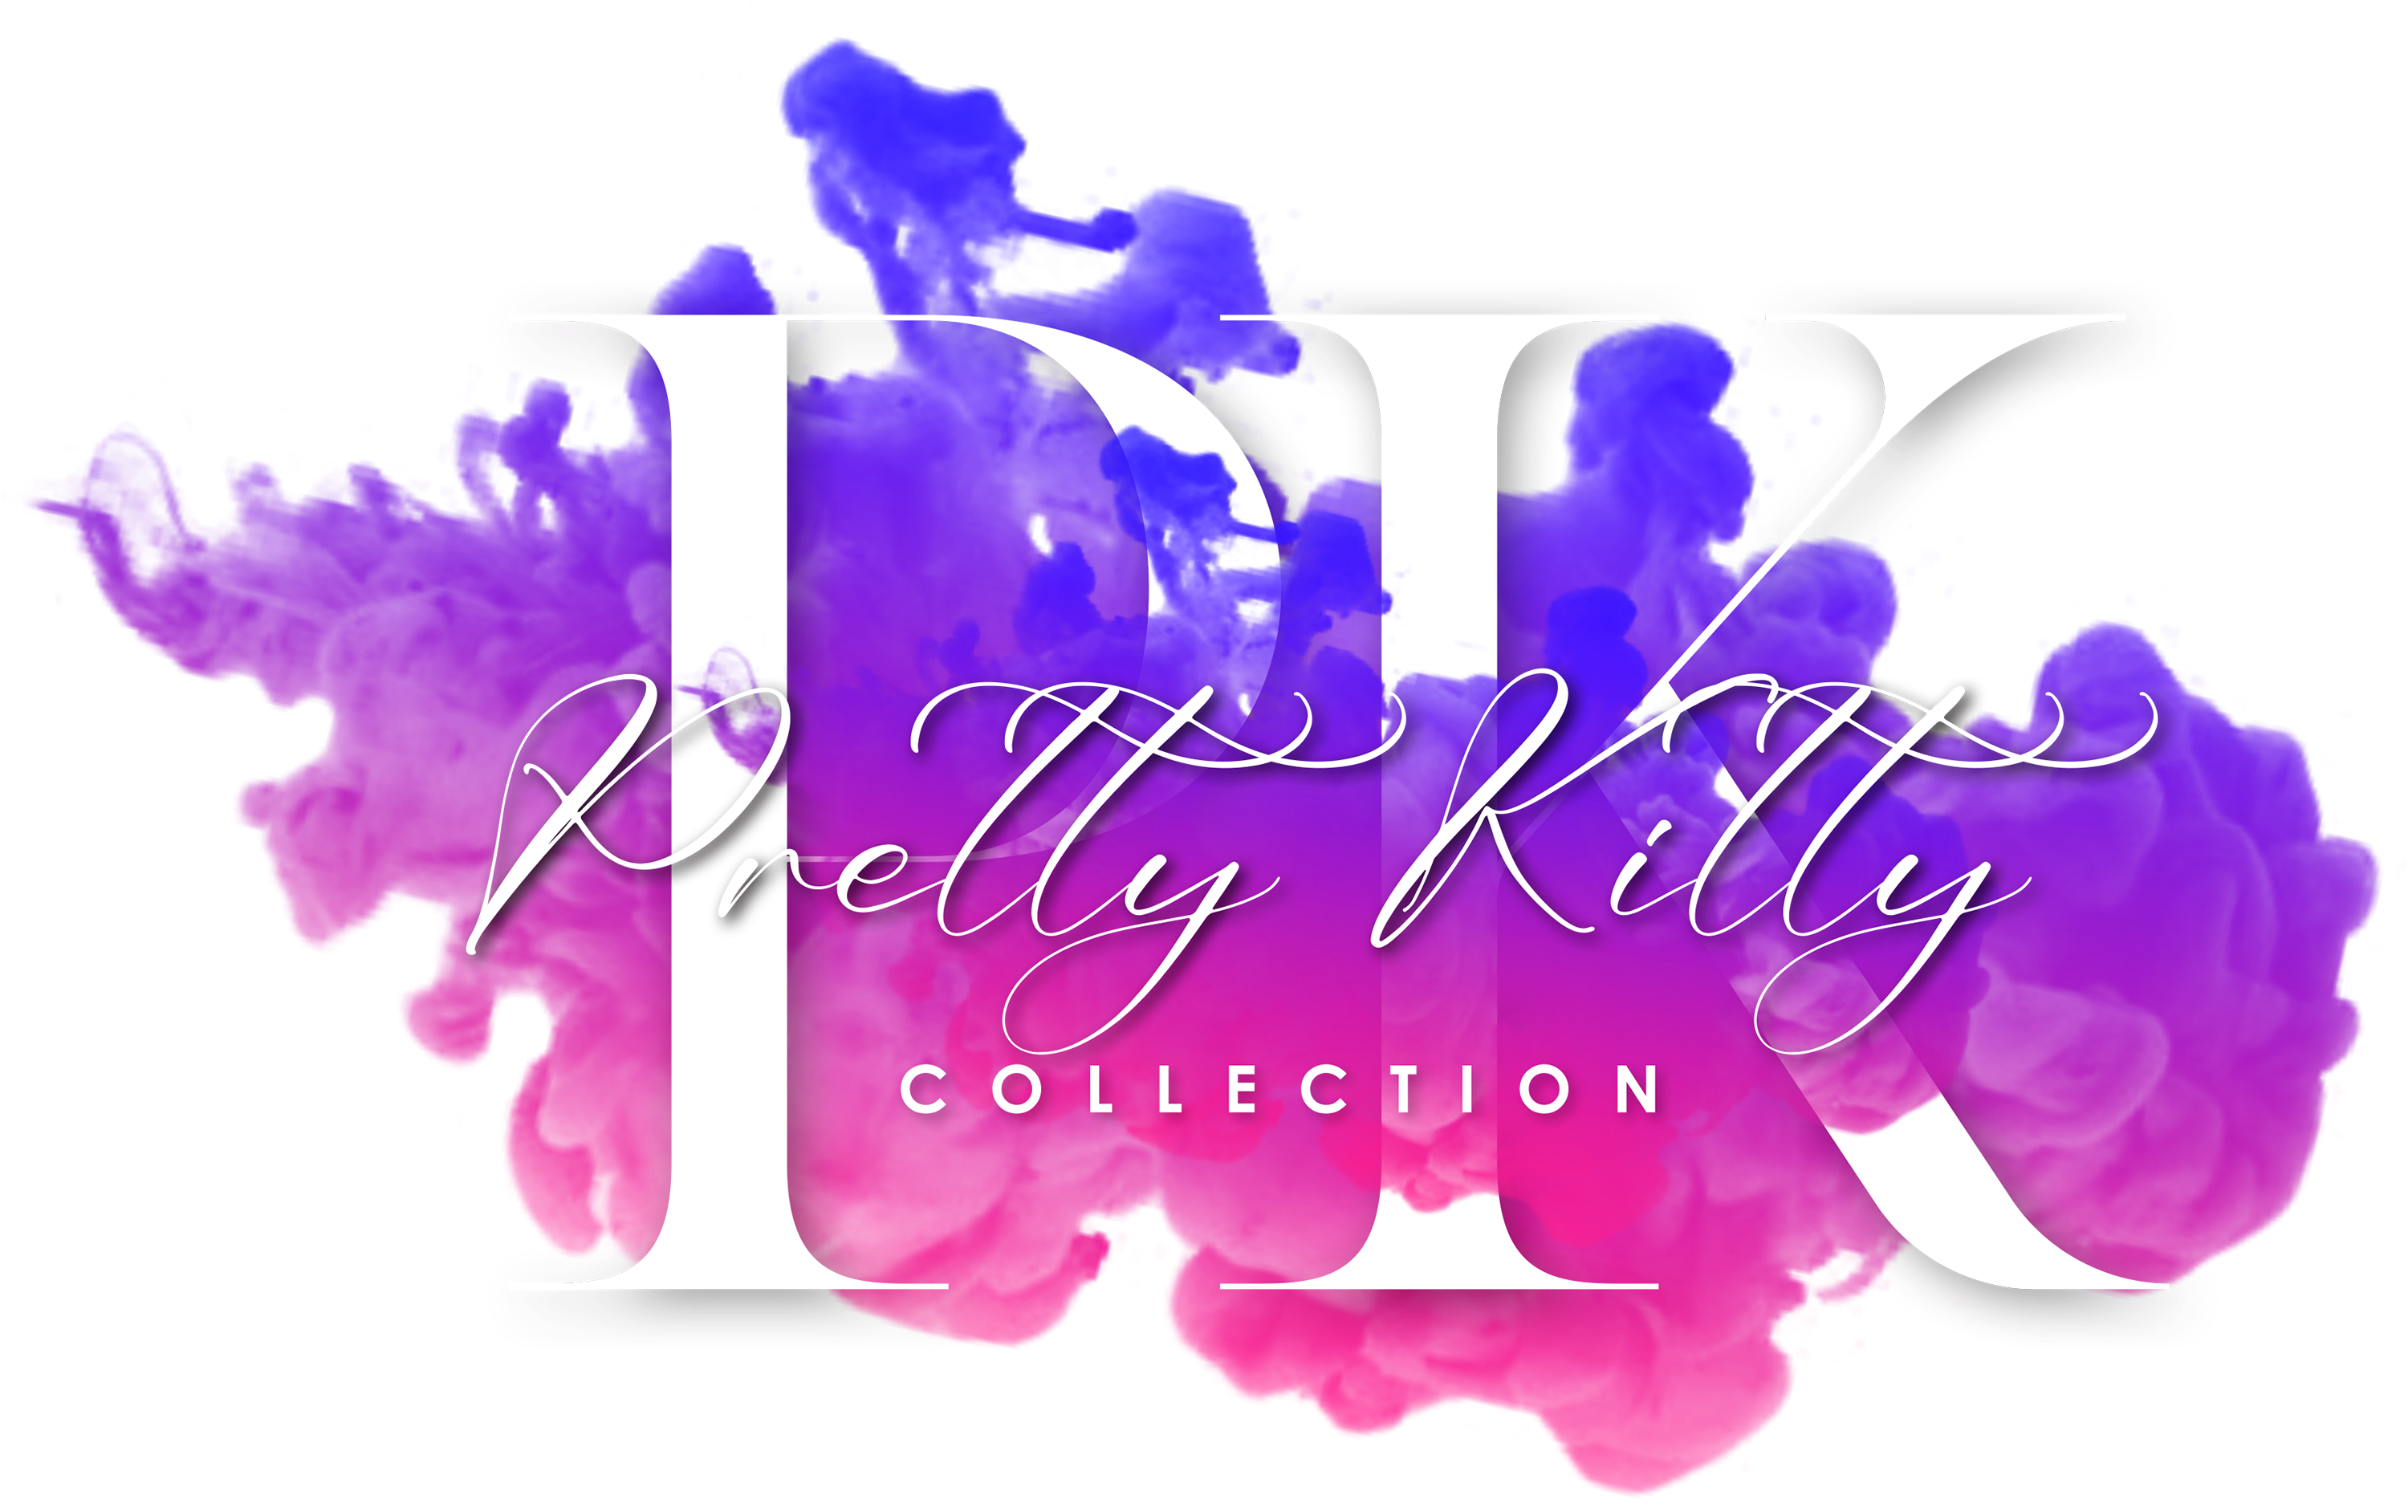 PrettyKitty Collection